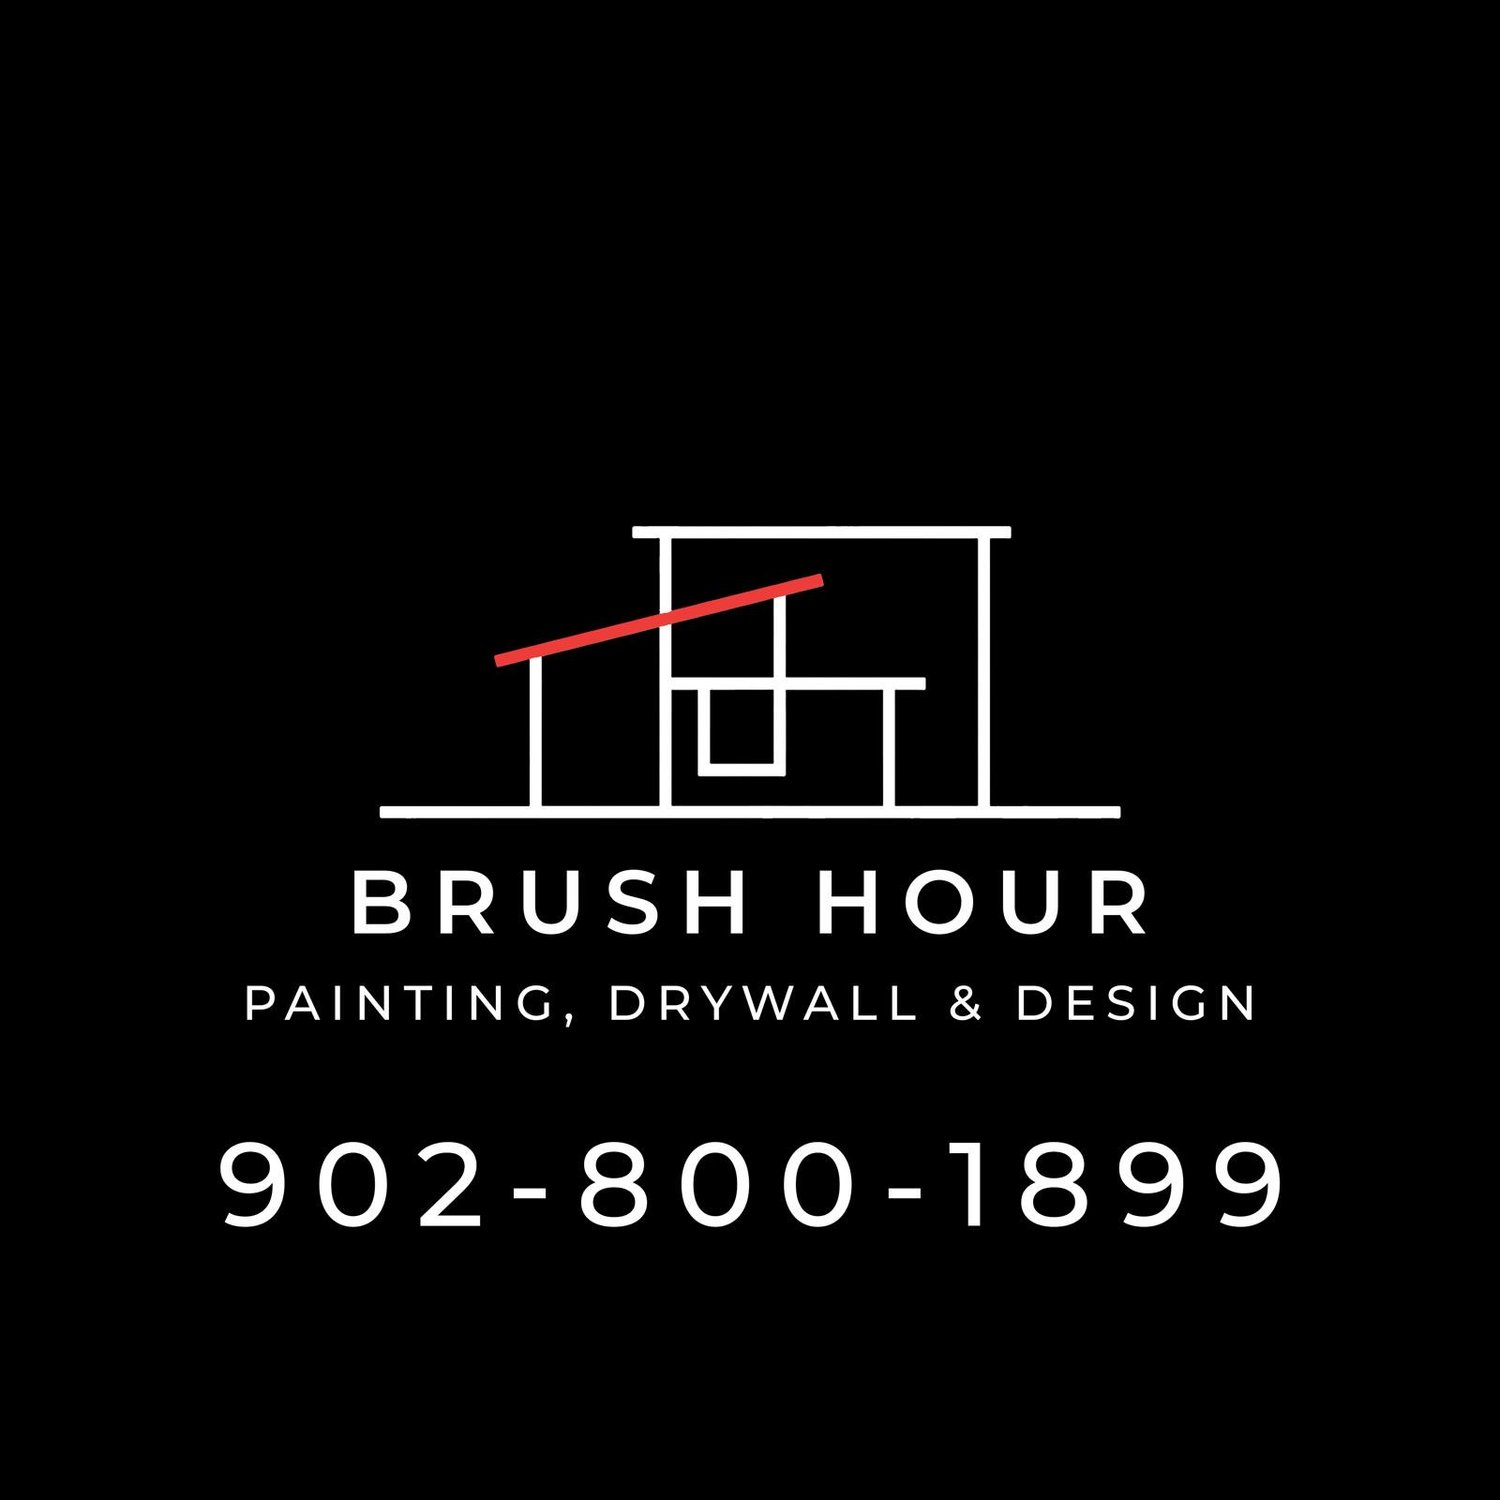 Brush Hour Painting and Drywalling Services